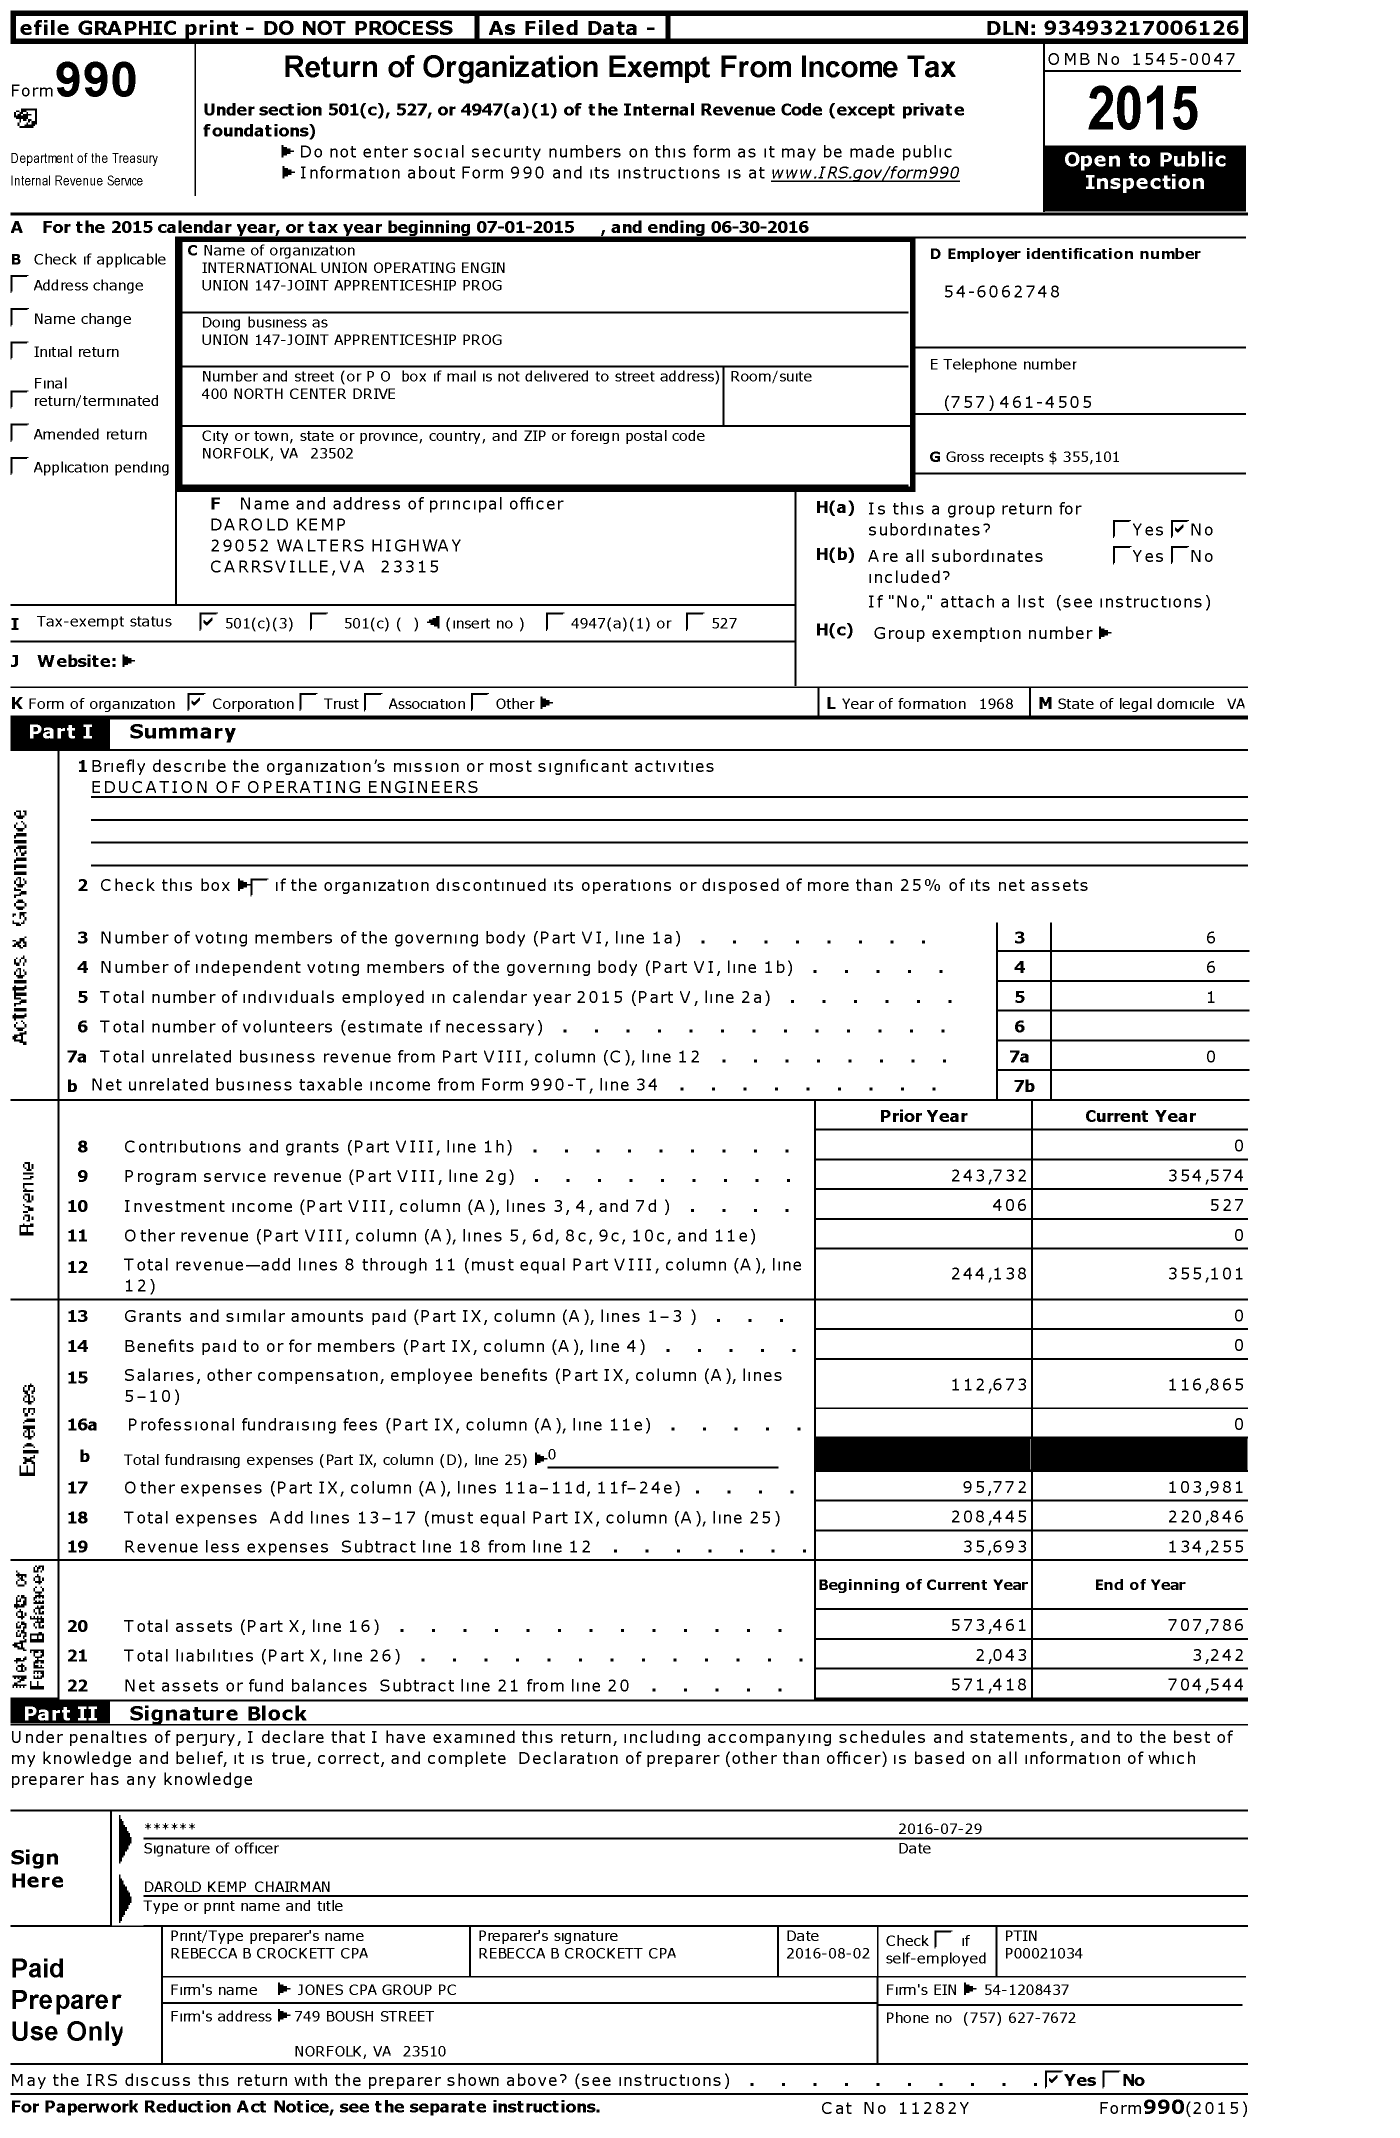 Image of first page of 2015 Form 990 for International Union Operating Engin Local 147 Joint Apprenticeship